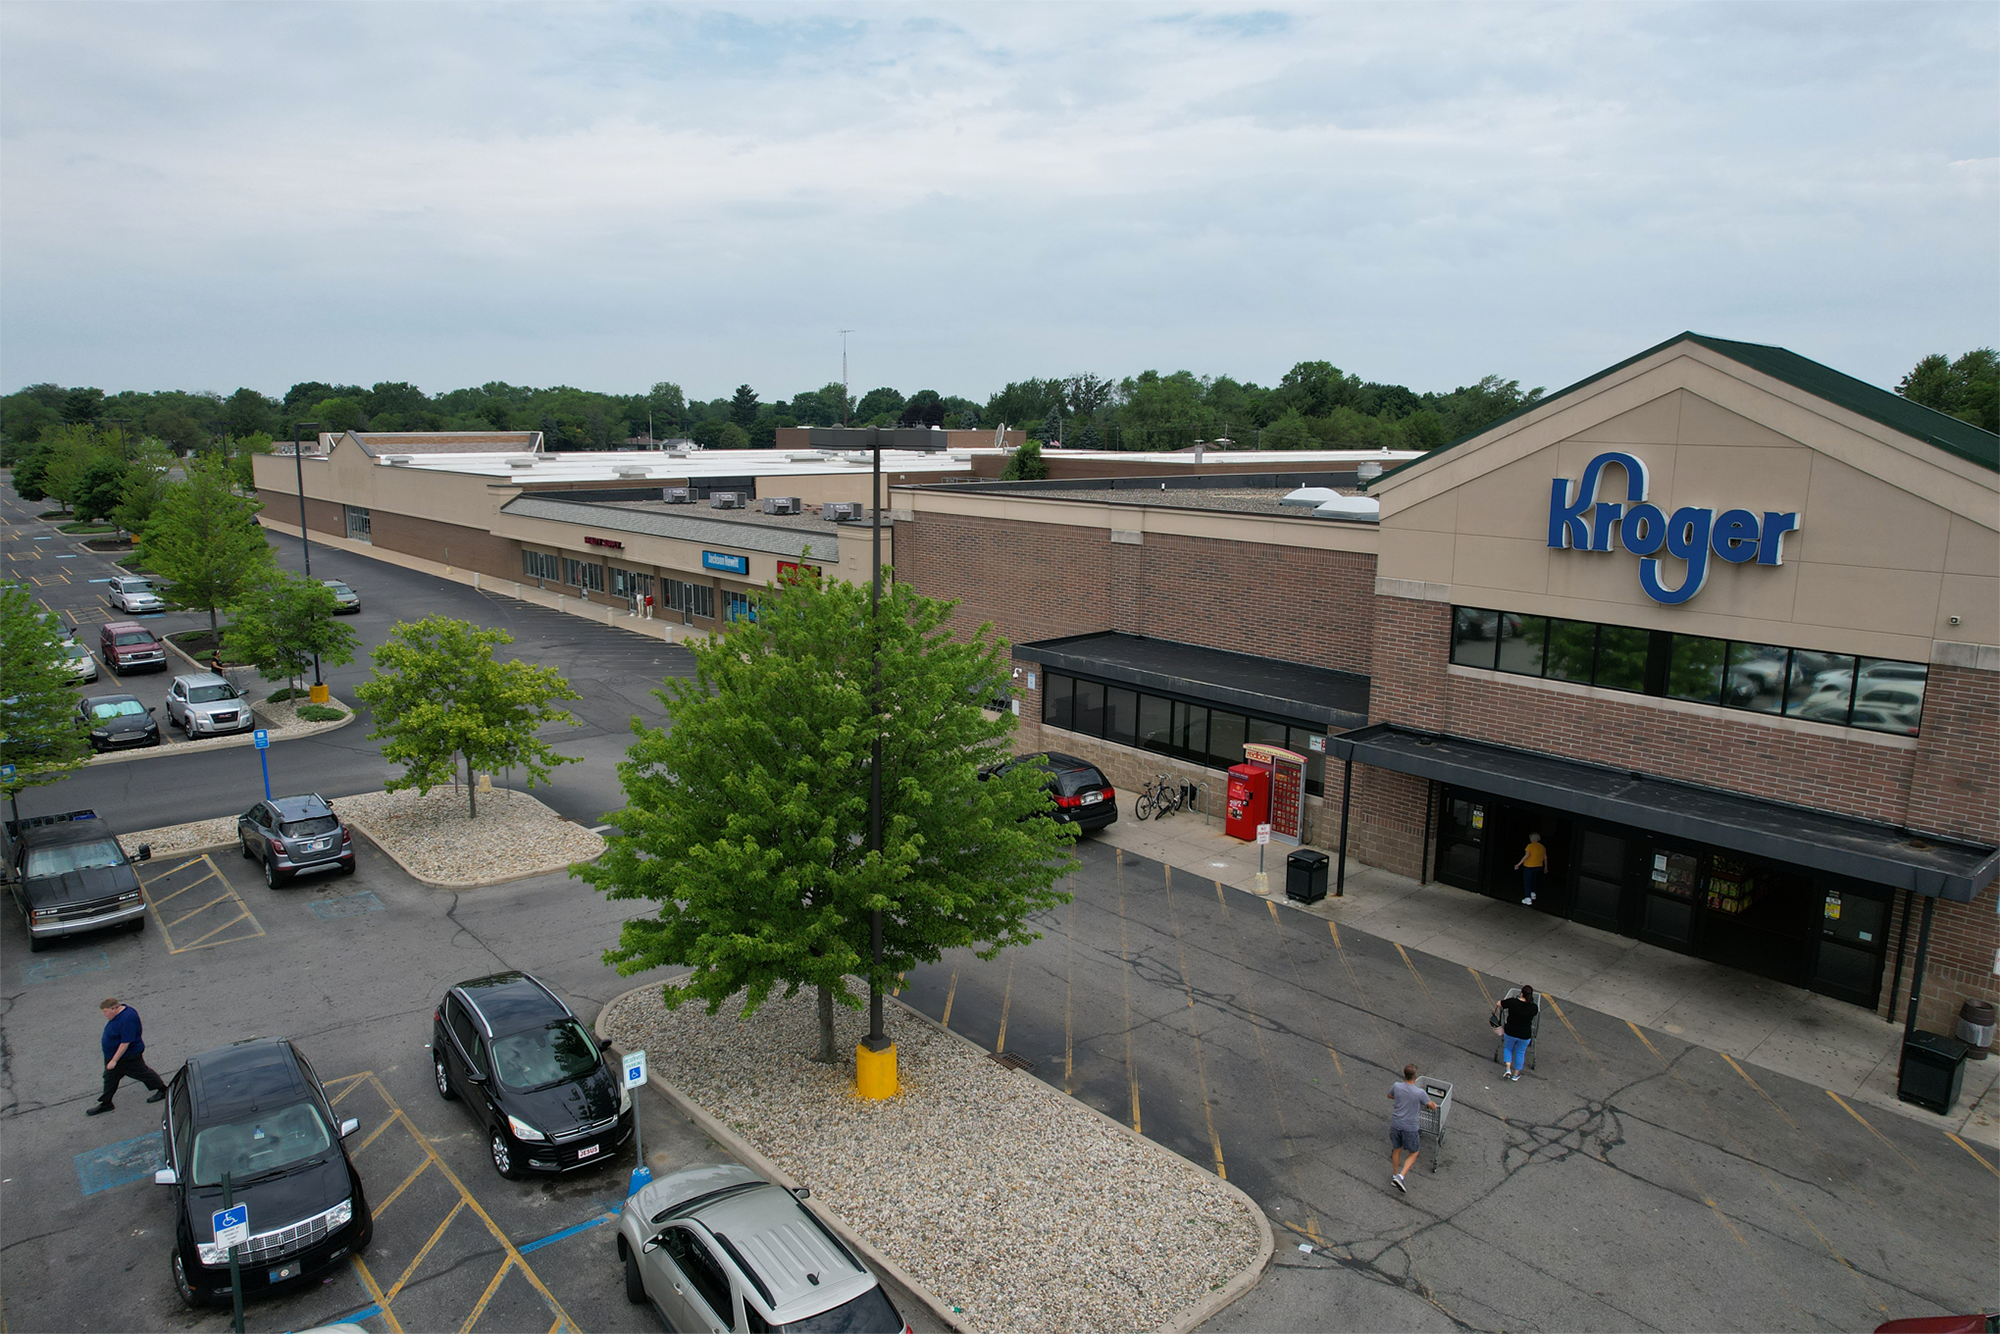 Woodland Crossing, Beauty Supply, Jackson Hewitt, Bella Brows, Kroger main entrance and parking lot aerial view.